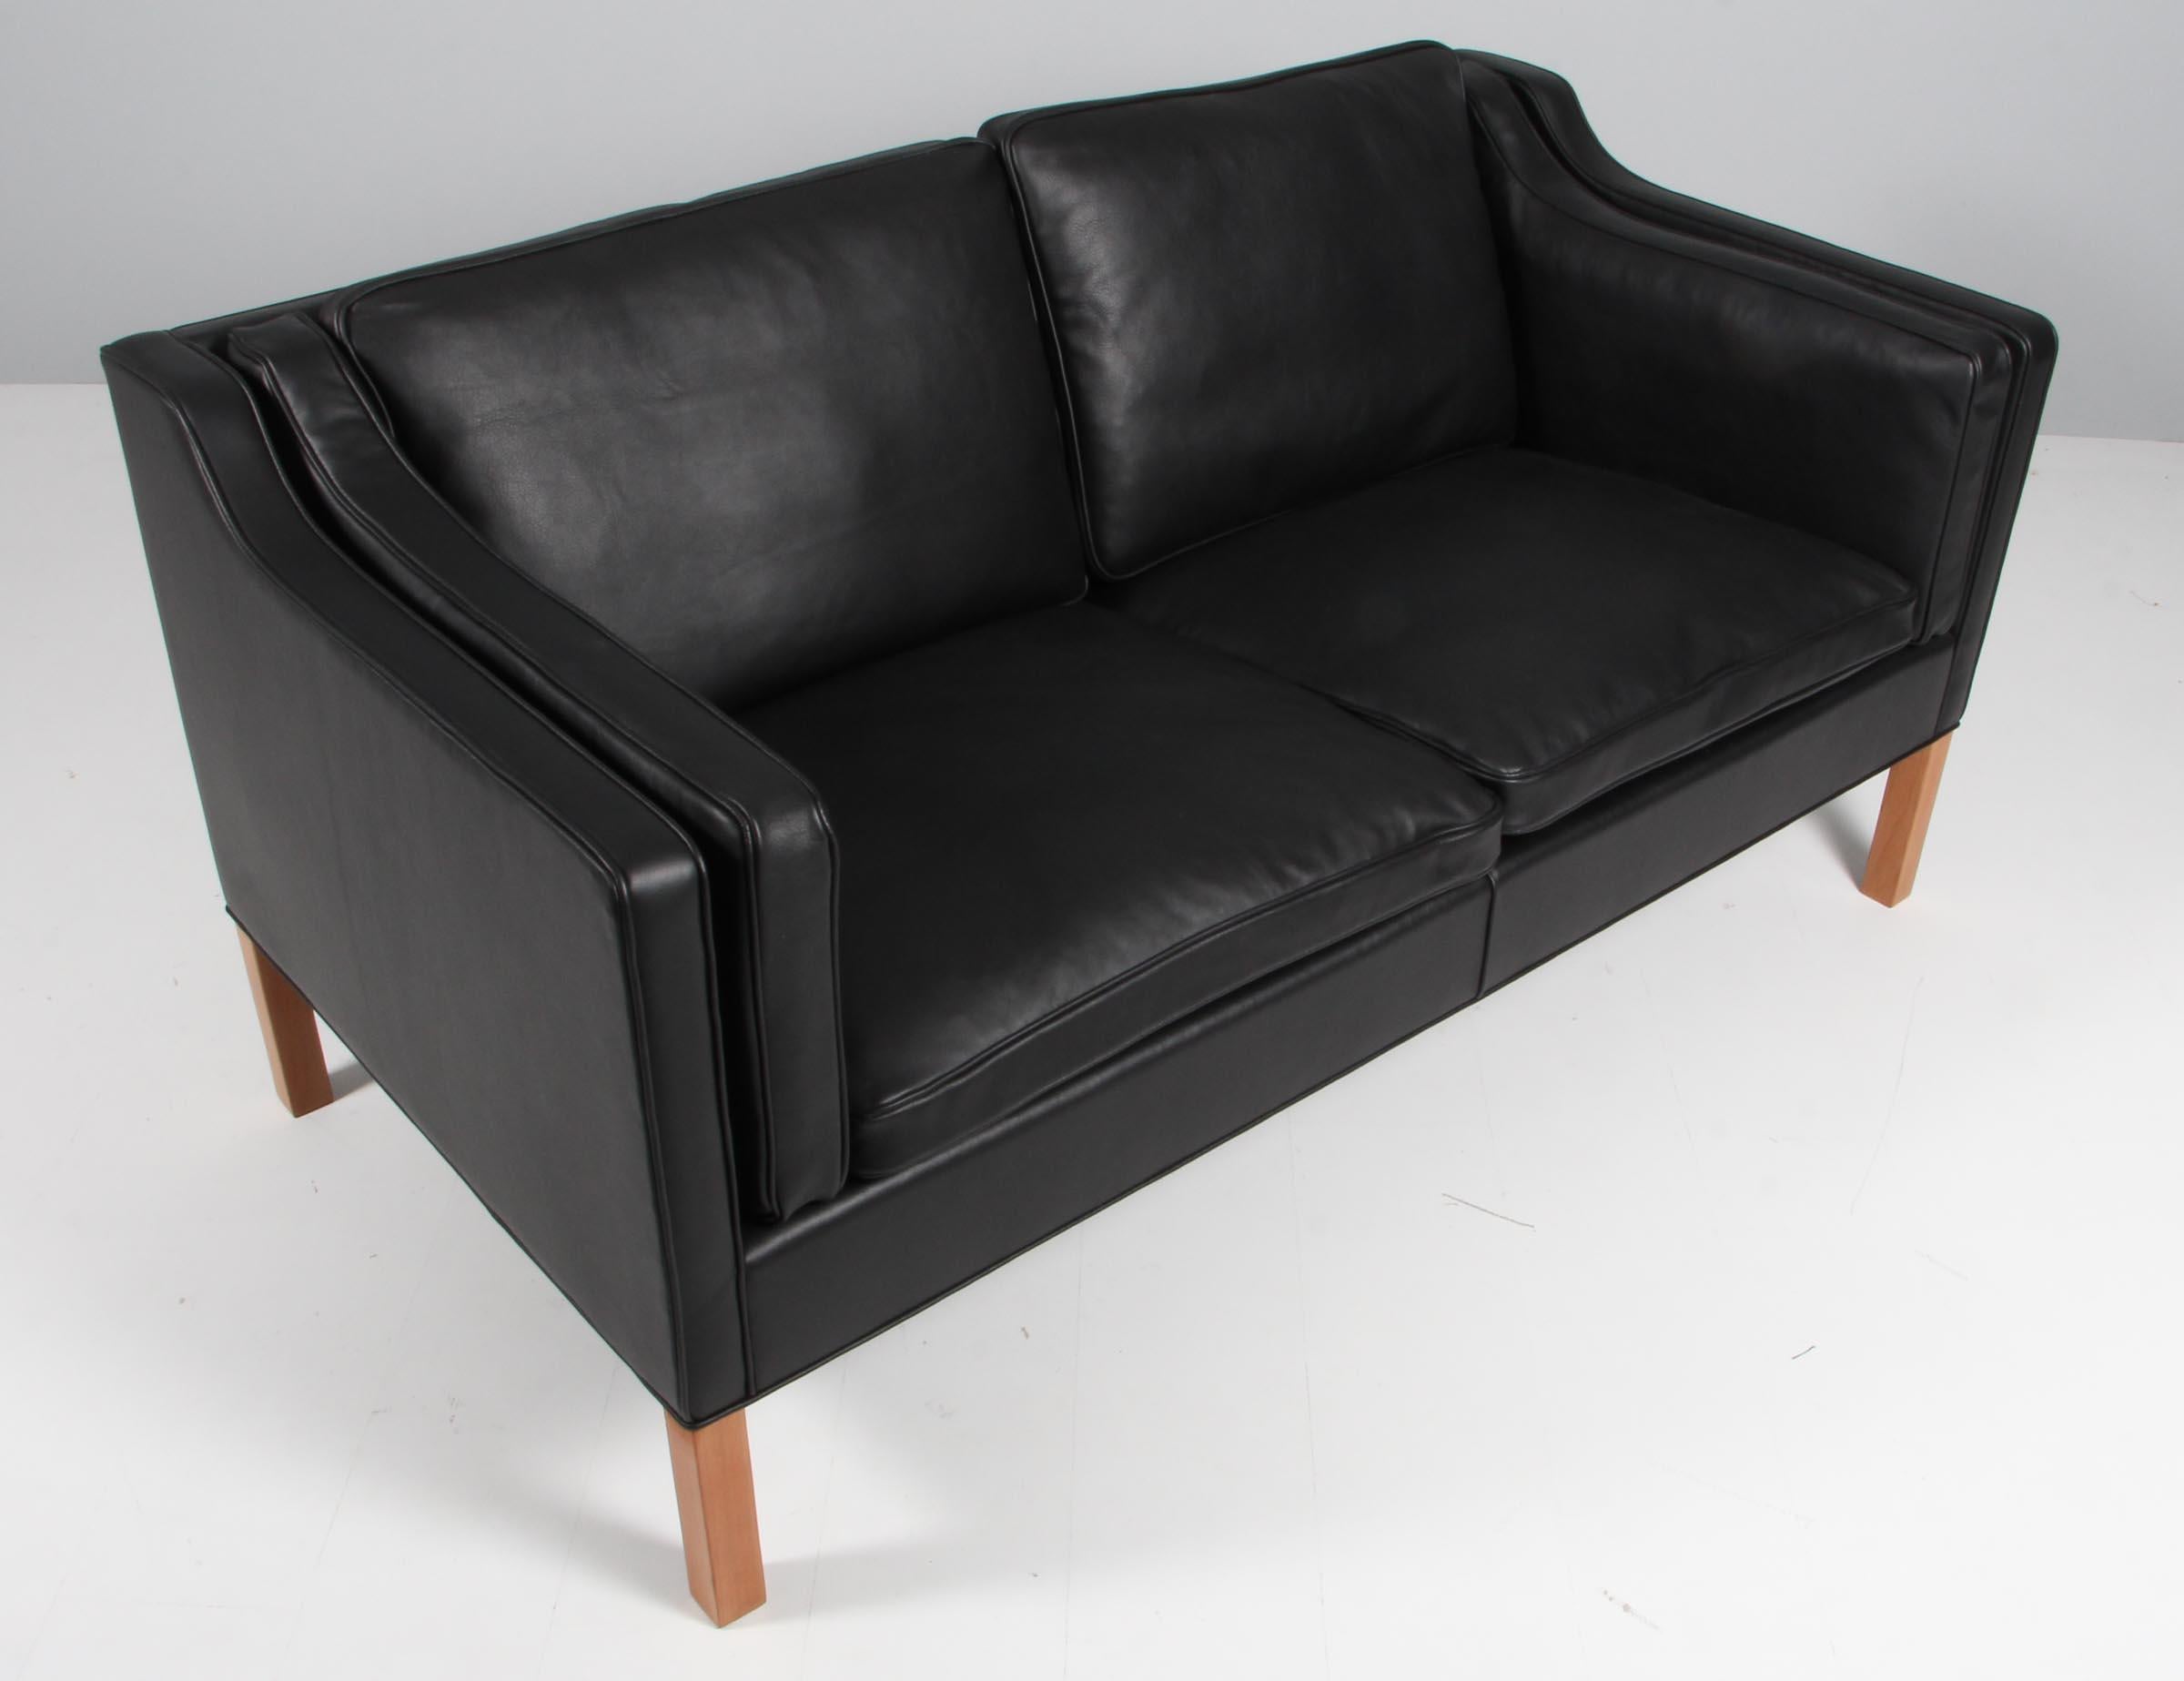 Børge Mogensen two-seat sofa new upholstered with walnut elegance aniline leather.

Legs of mahogany.

Model 2212, made by Fredericia Furniture.